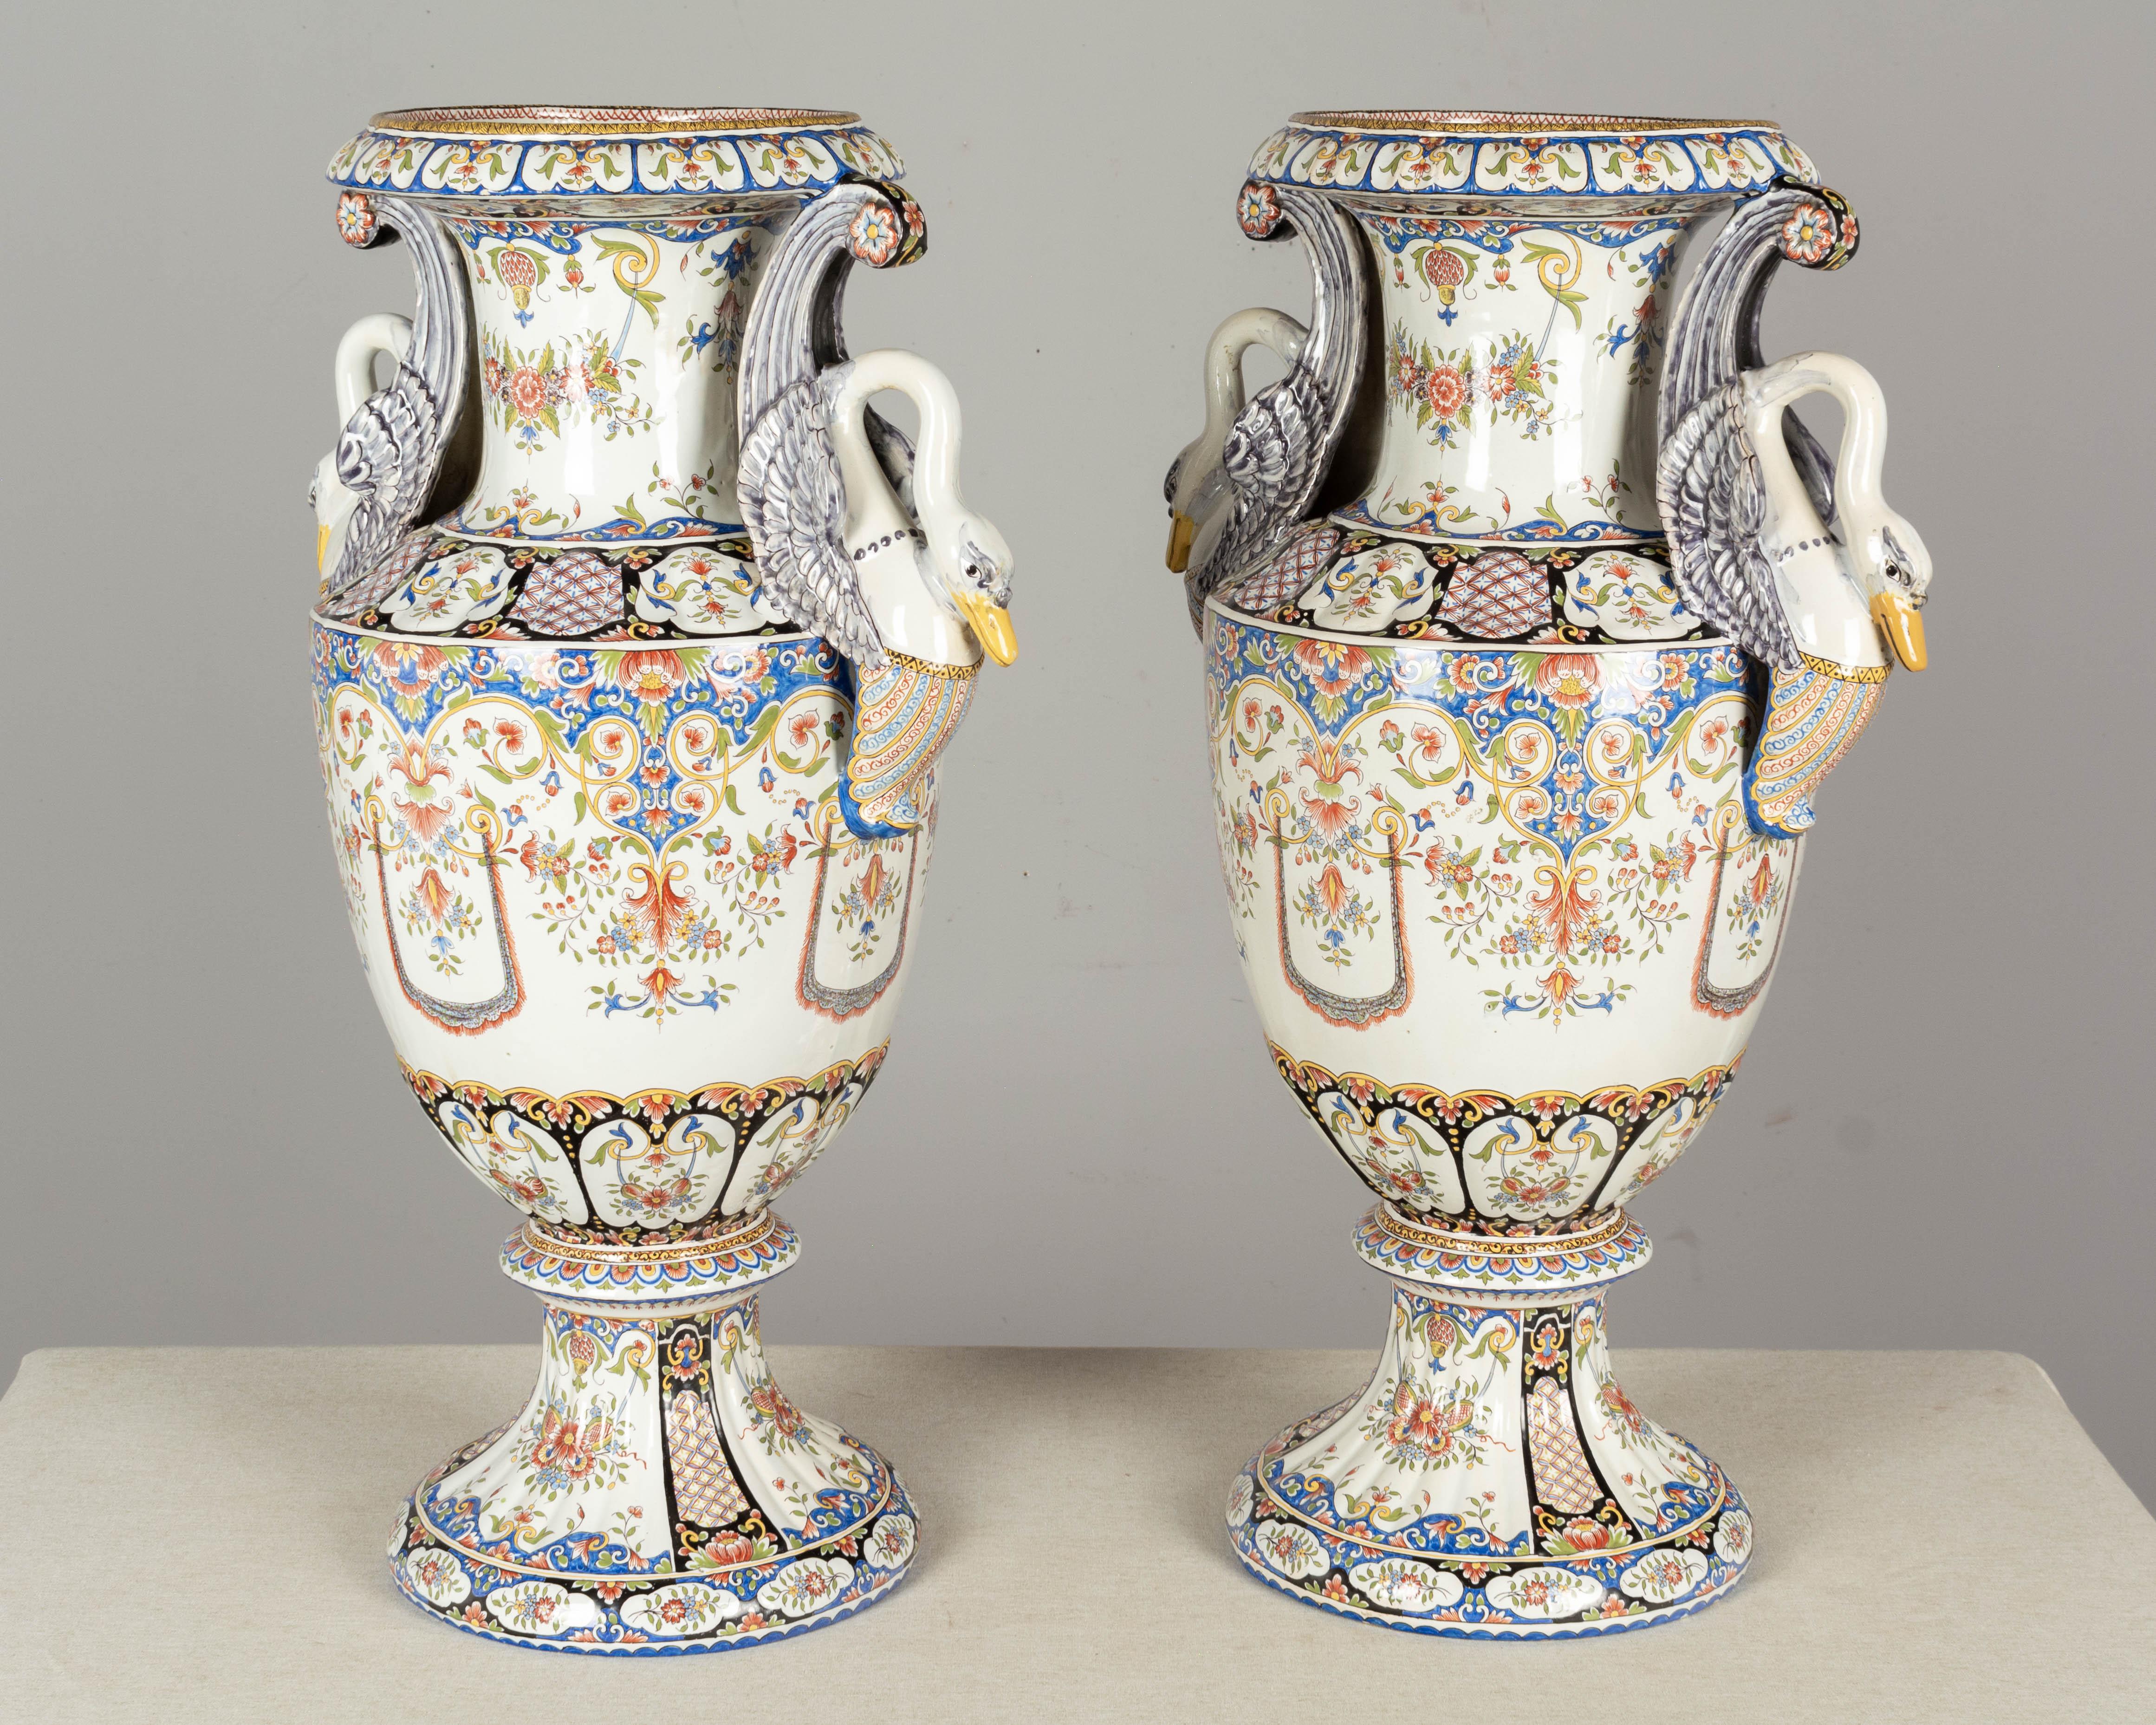 19th Century French Desvres Faience Urns, a Pair For Sale 3